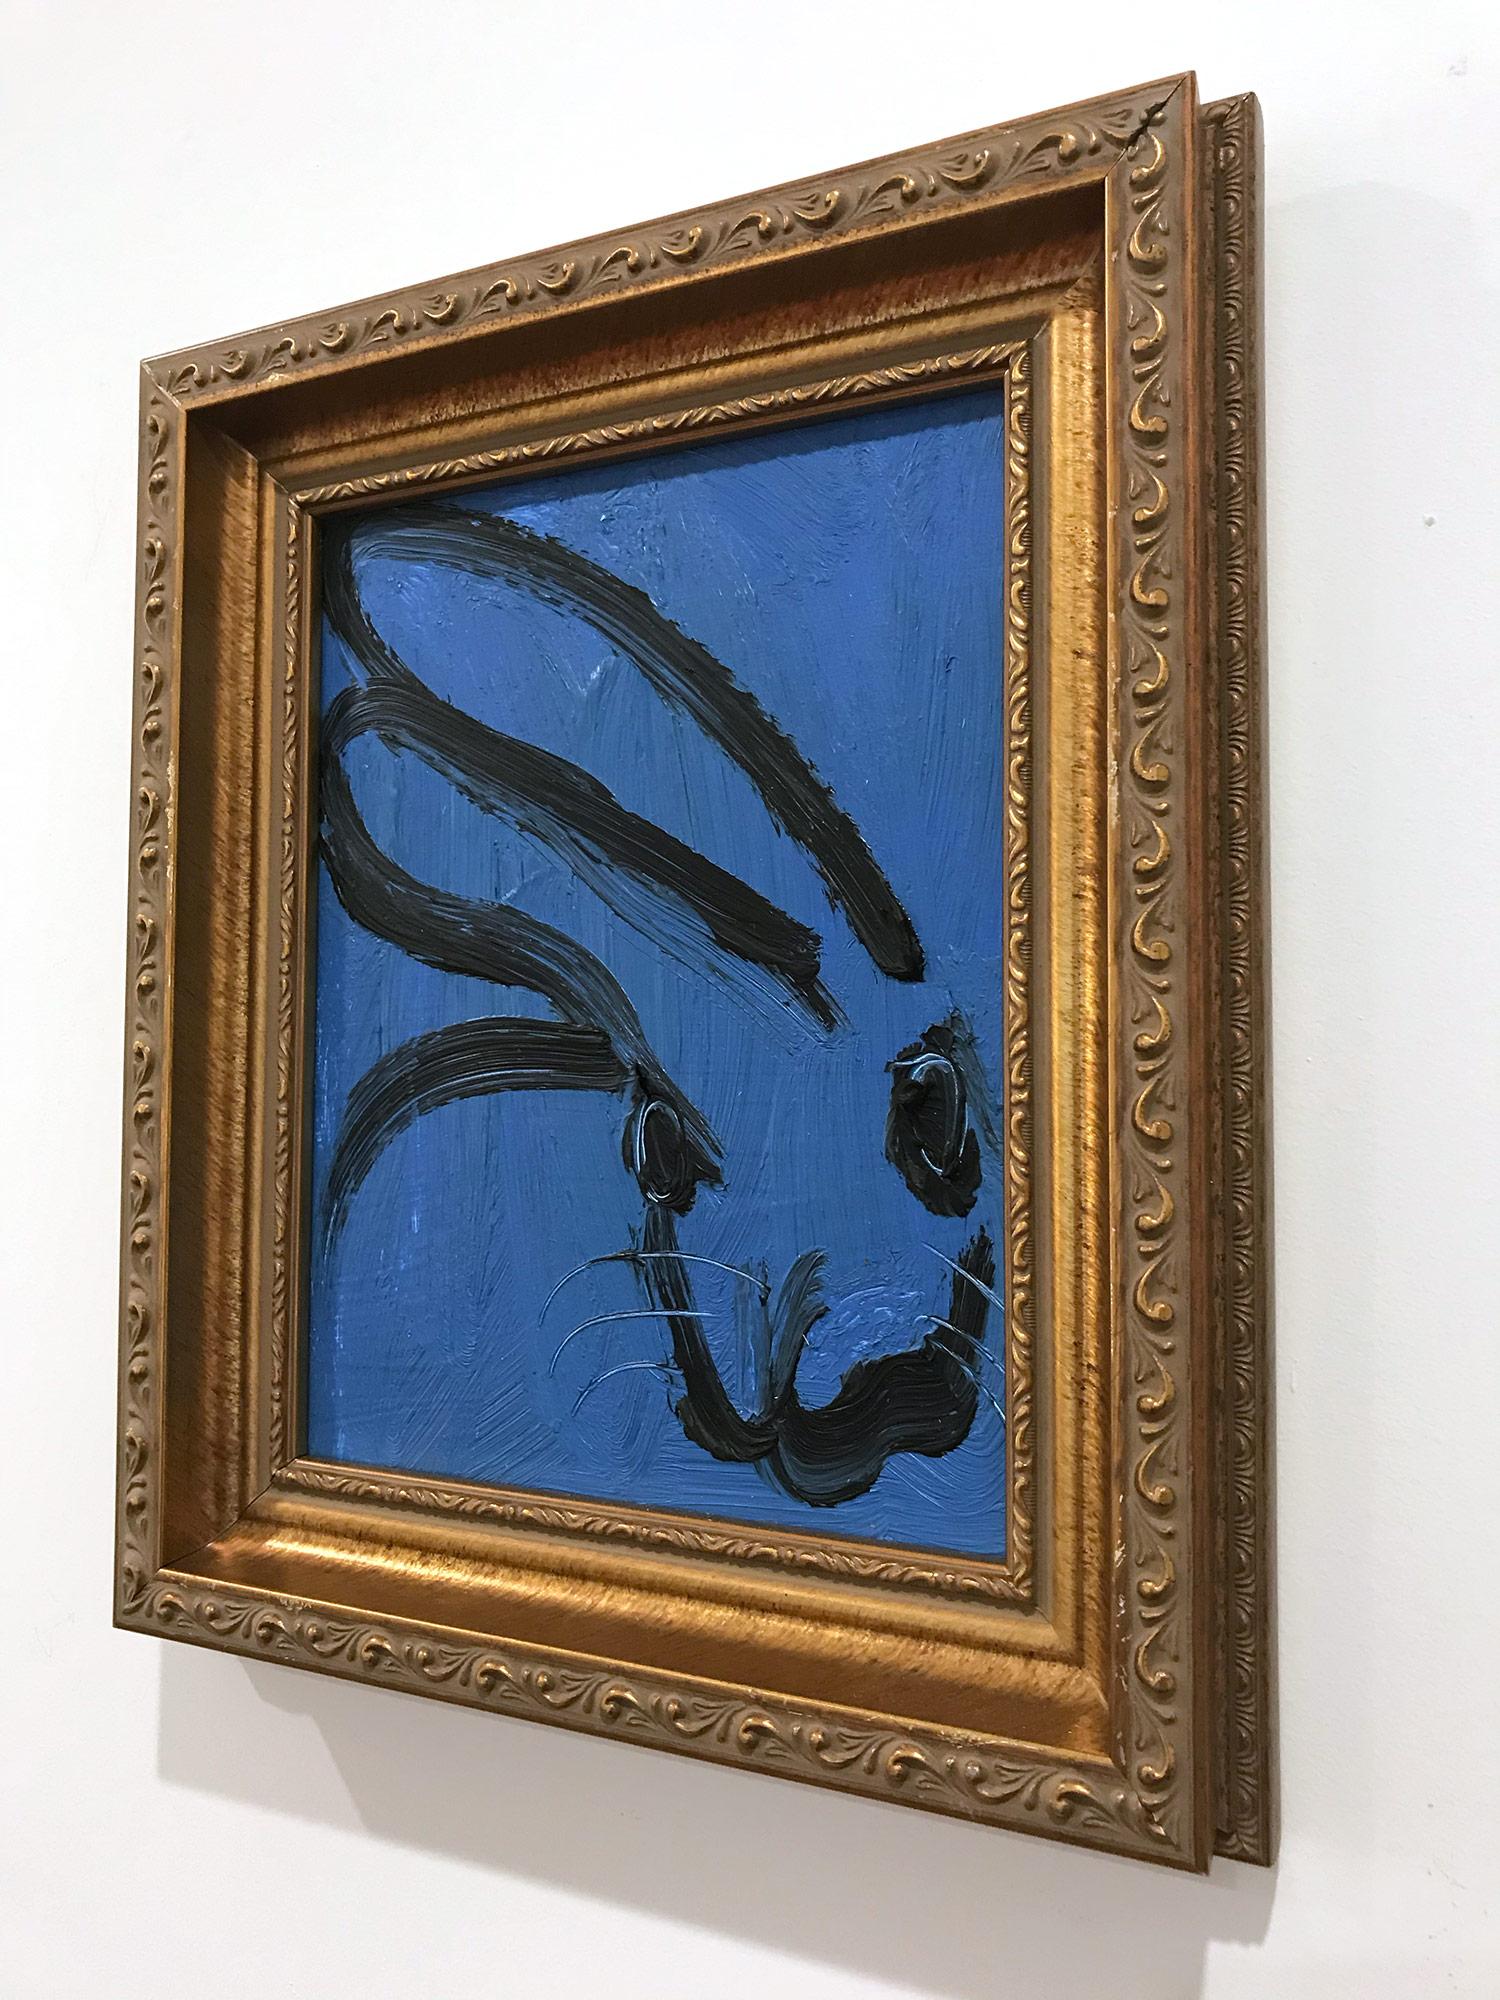 A wonderful composition of one of Slonem's most iconic subjects, Bunnies. This piece depicts a gestural figure of a black bunny on a Royal blue background with thick use of paint. It is housed in a wonderful antique style carved wood frame. Inspired